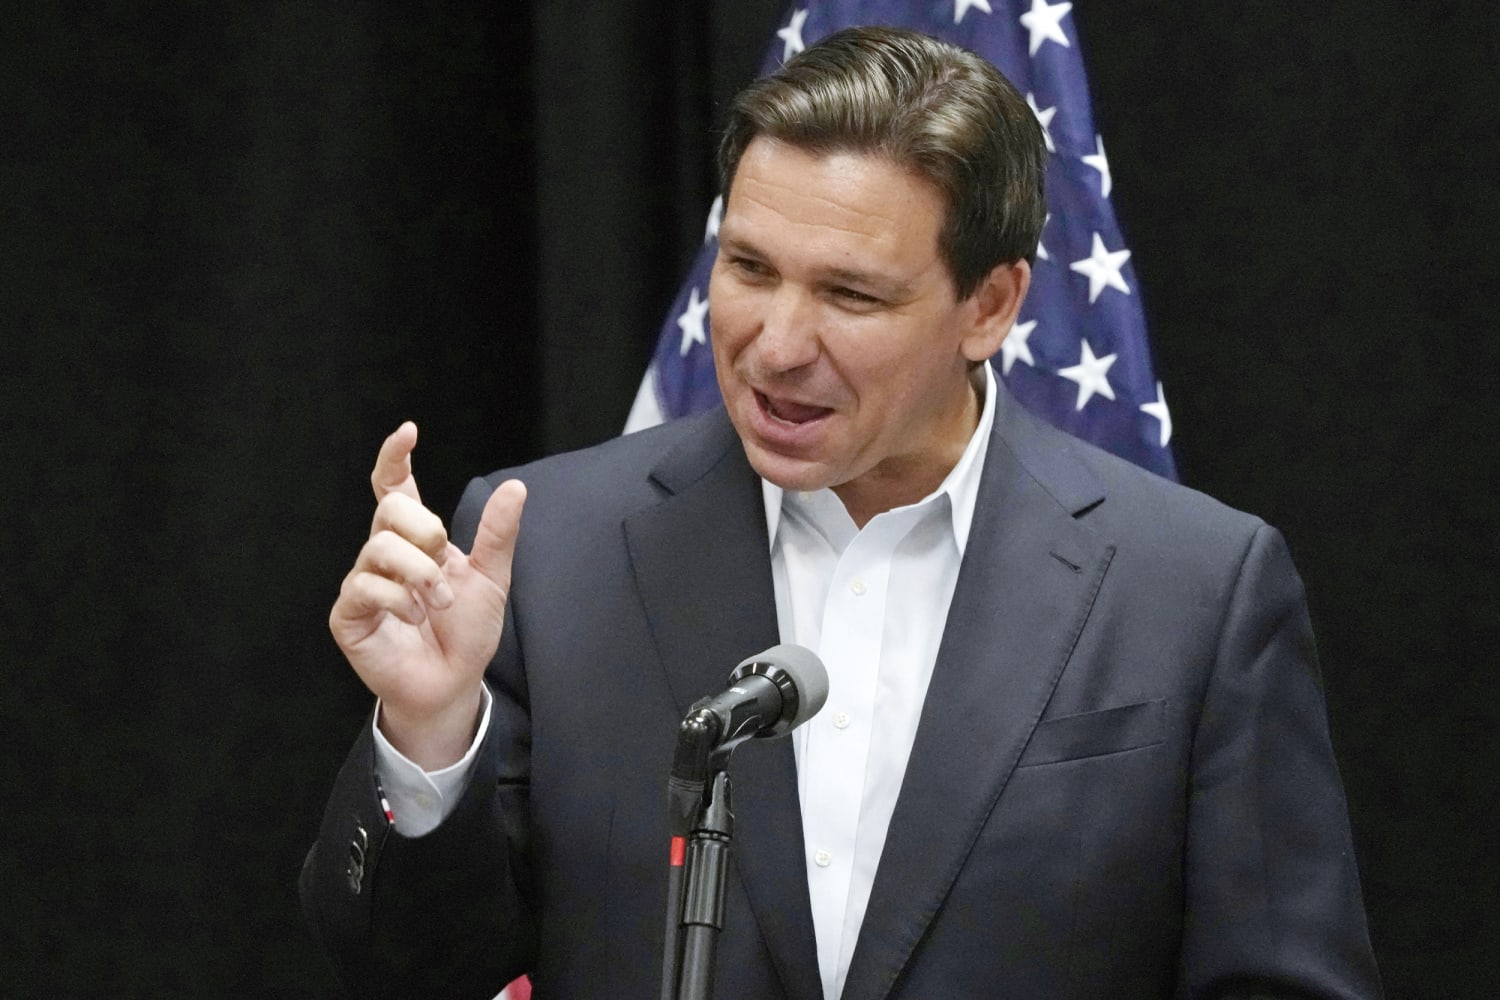 Ron DeSantis fires back at NAACP over travel advisory, education and shootings